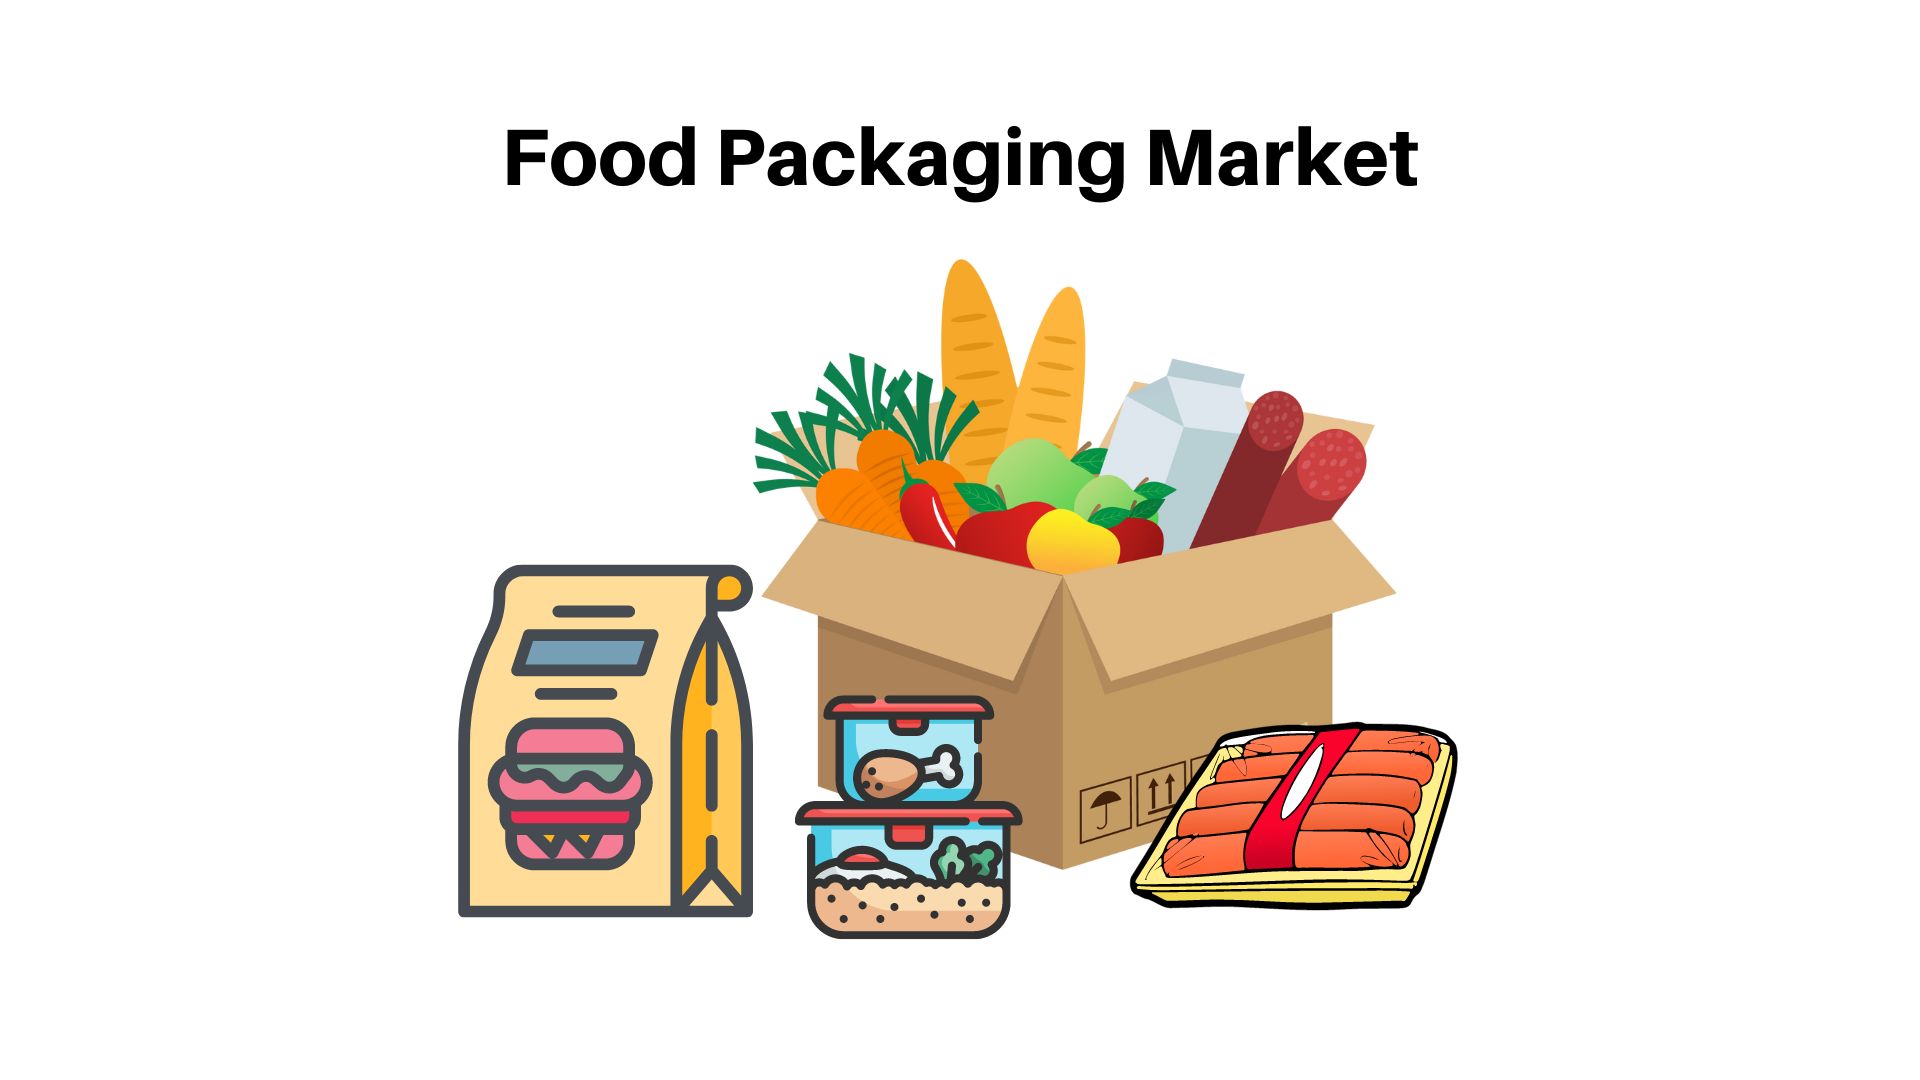 Food Packaging Market Size to Grow by USD 592.8 billion by 2032 | Grow by 5.3% Y-O-Y